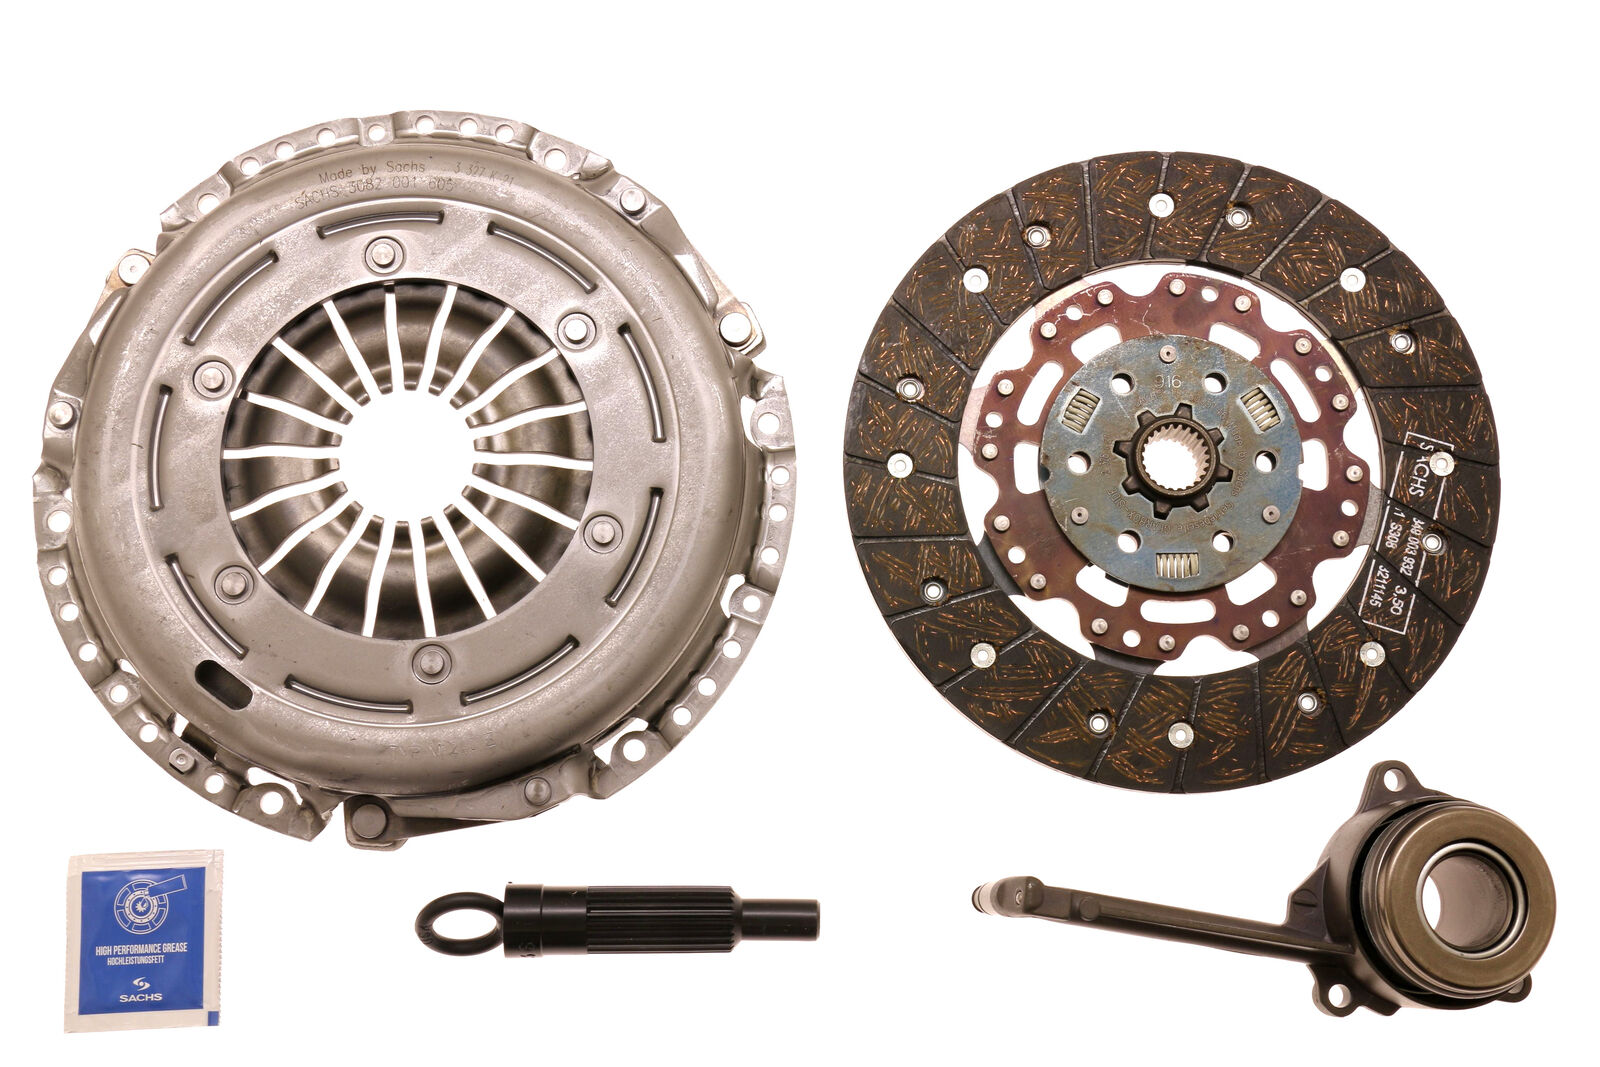  Clutch Kit for Volkswagen GTI 2006 - 2014 & Others SACHS Xtend K70485-02